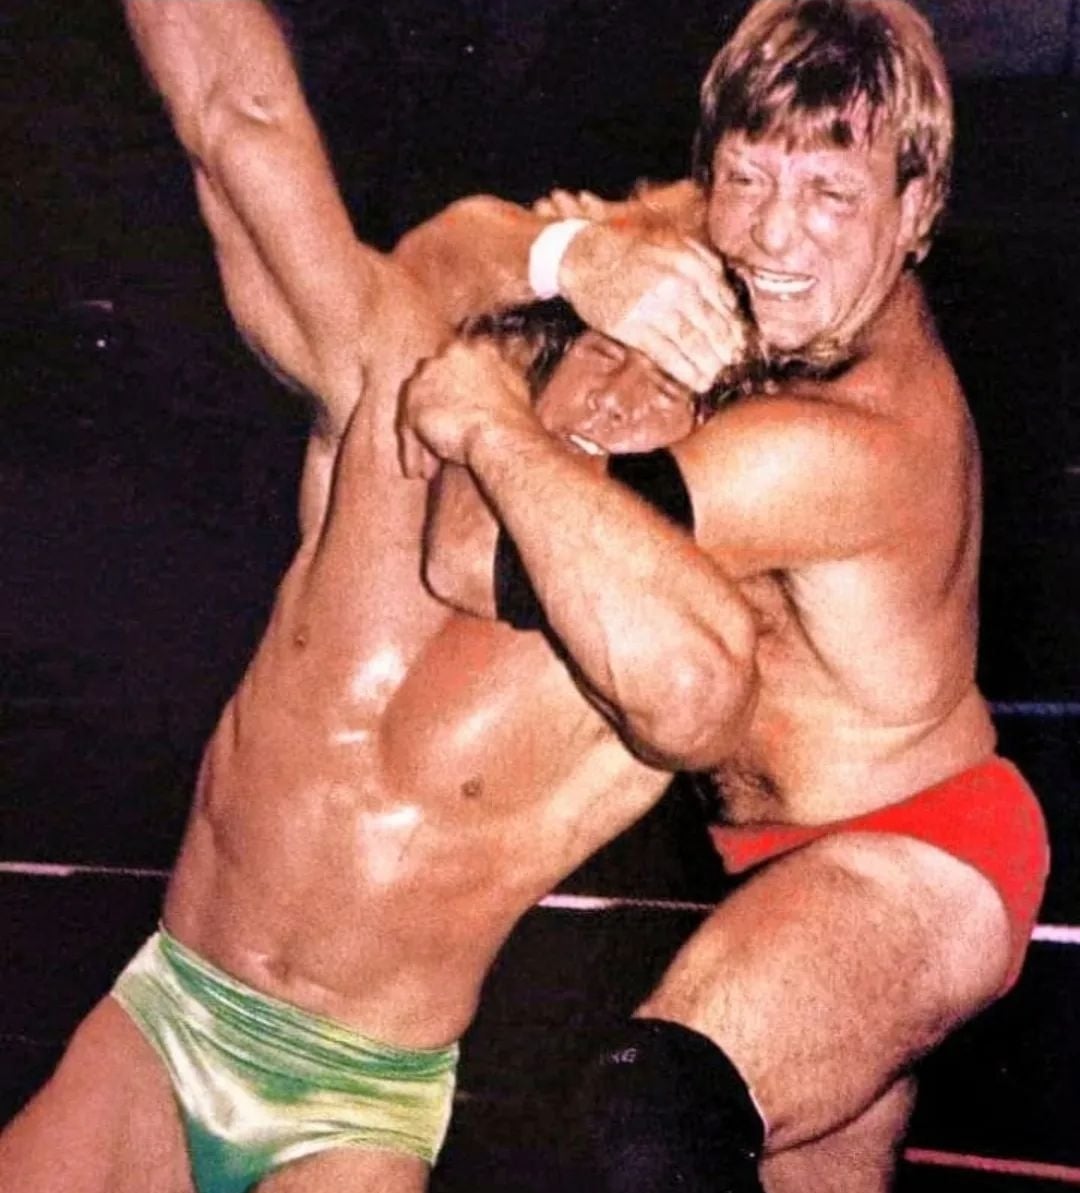 On this day in 1989 my Dad was in Ohio battling #KerryVonErich for the USWA Texas Heavyweight Title.

#WrestlingCommunity #WrestlingTwitter